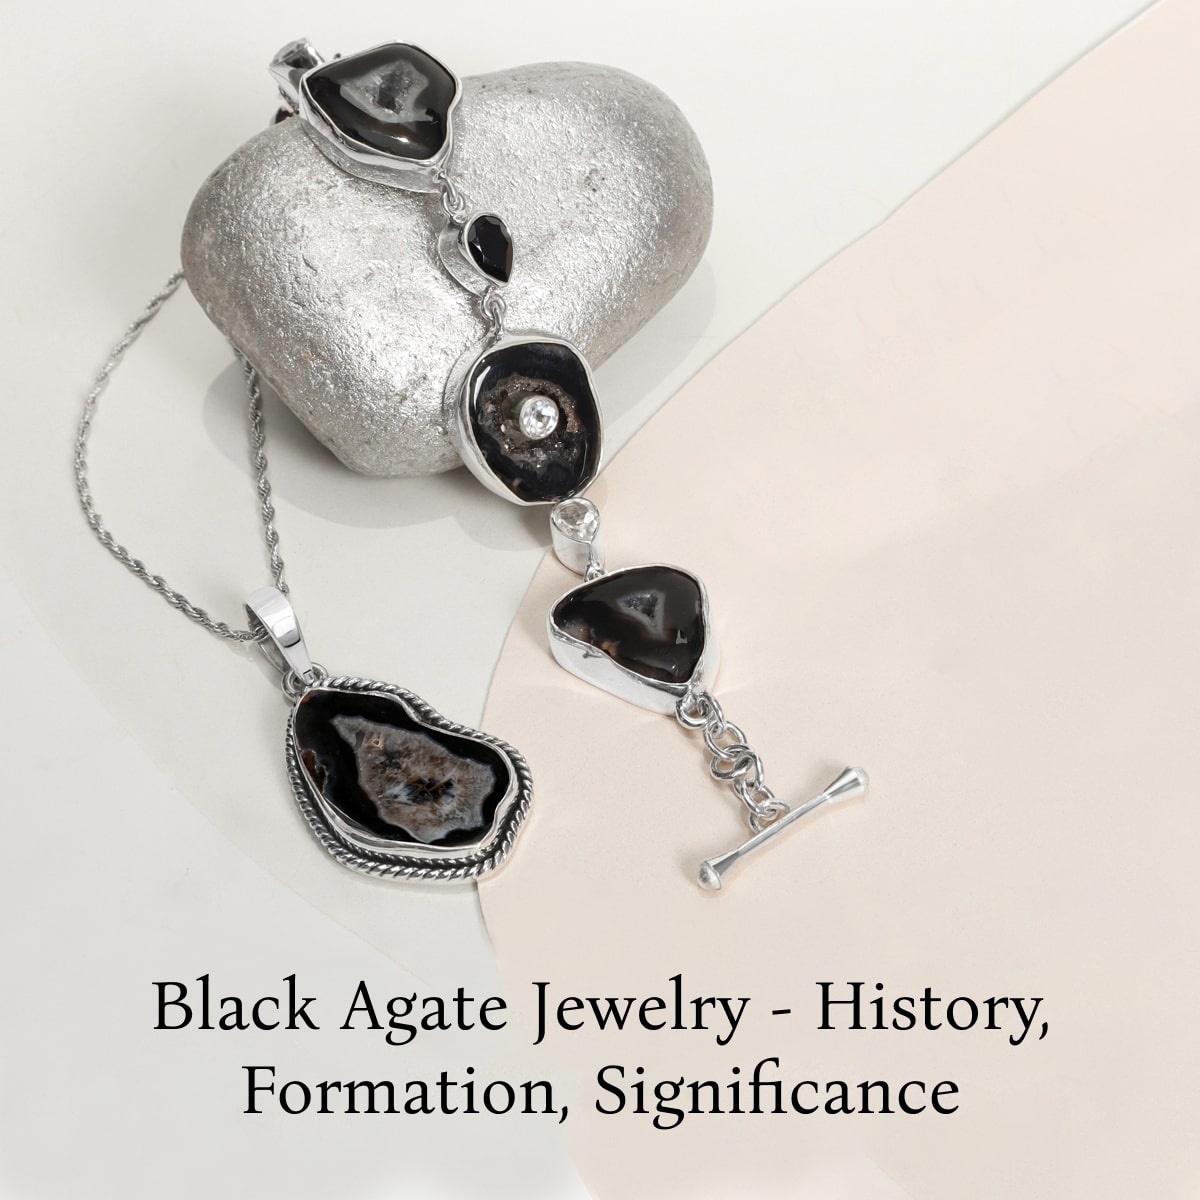 Black Agate Jewelry - Meaning, History, Formation, Healing Properties, Uses, and Care